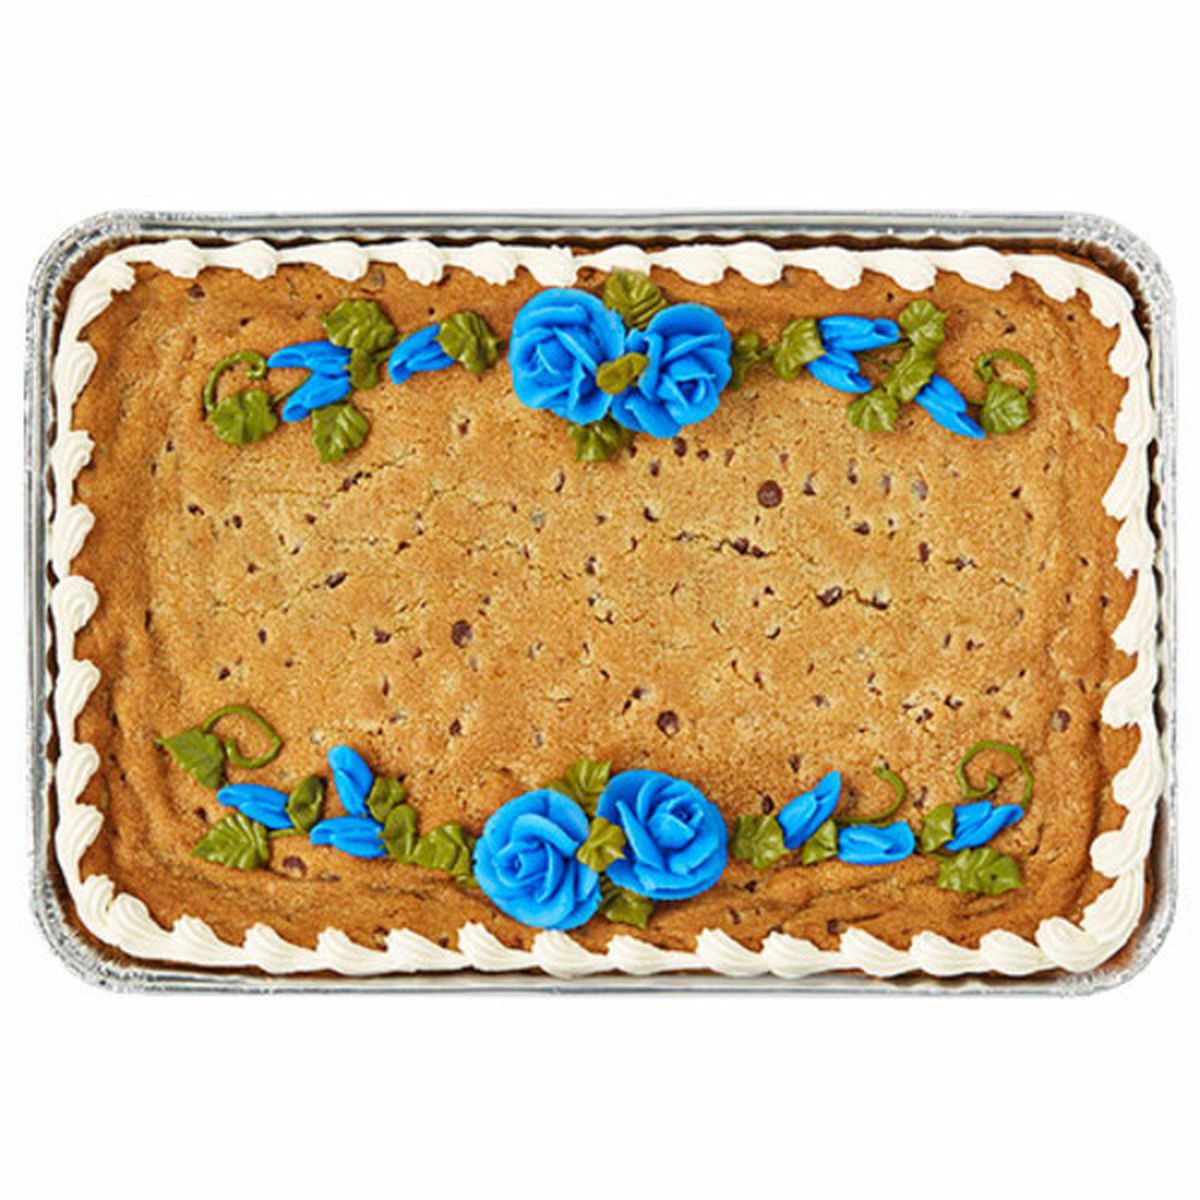 Calories in Wegmans 1/4 Sheet Ultimate Chocolate Chip Cookie Cake